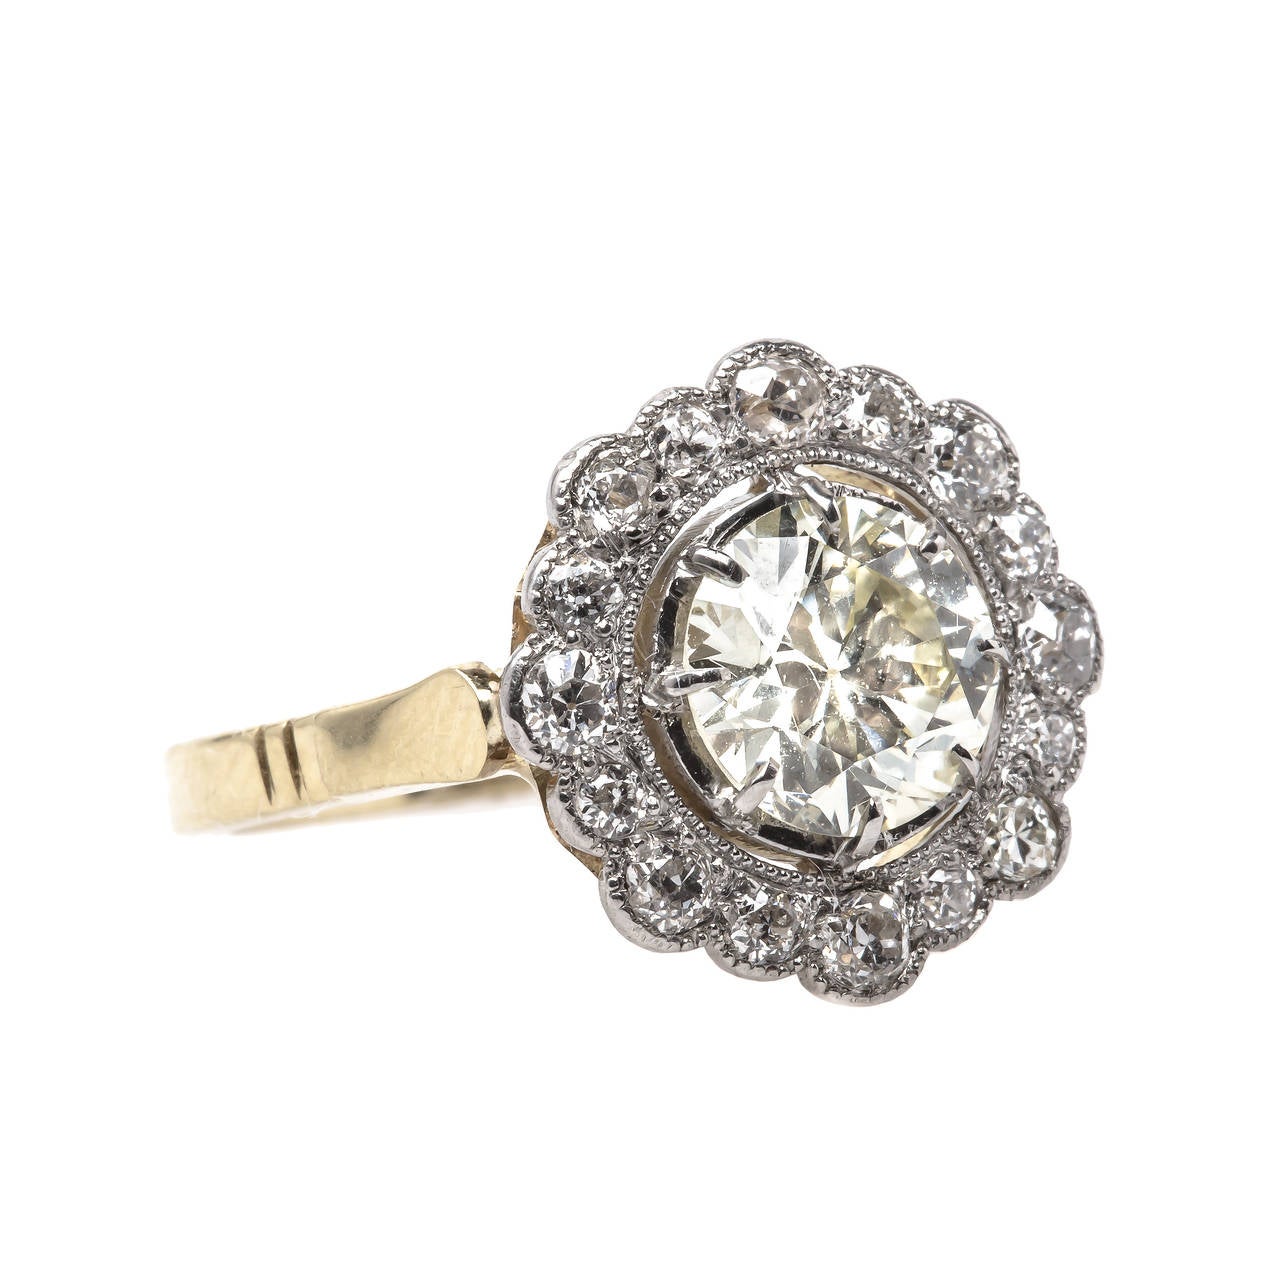 Scarborough is a show stopping Edwardian era platinum topped 18k yellow gold ring stamped with French Hallmarks. The center 1.59 carat Transitional Brilliant diamond is accompanied with an EGL certificate stating the diamond is O-P color and VS1